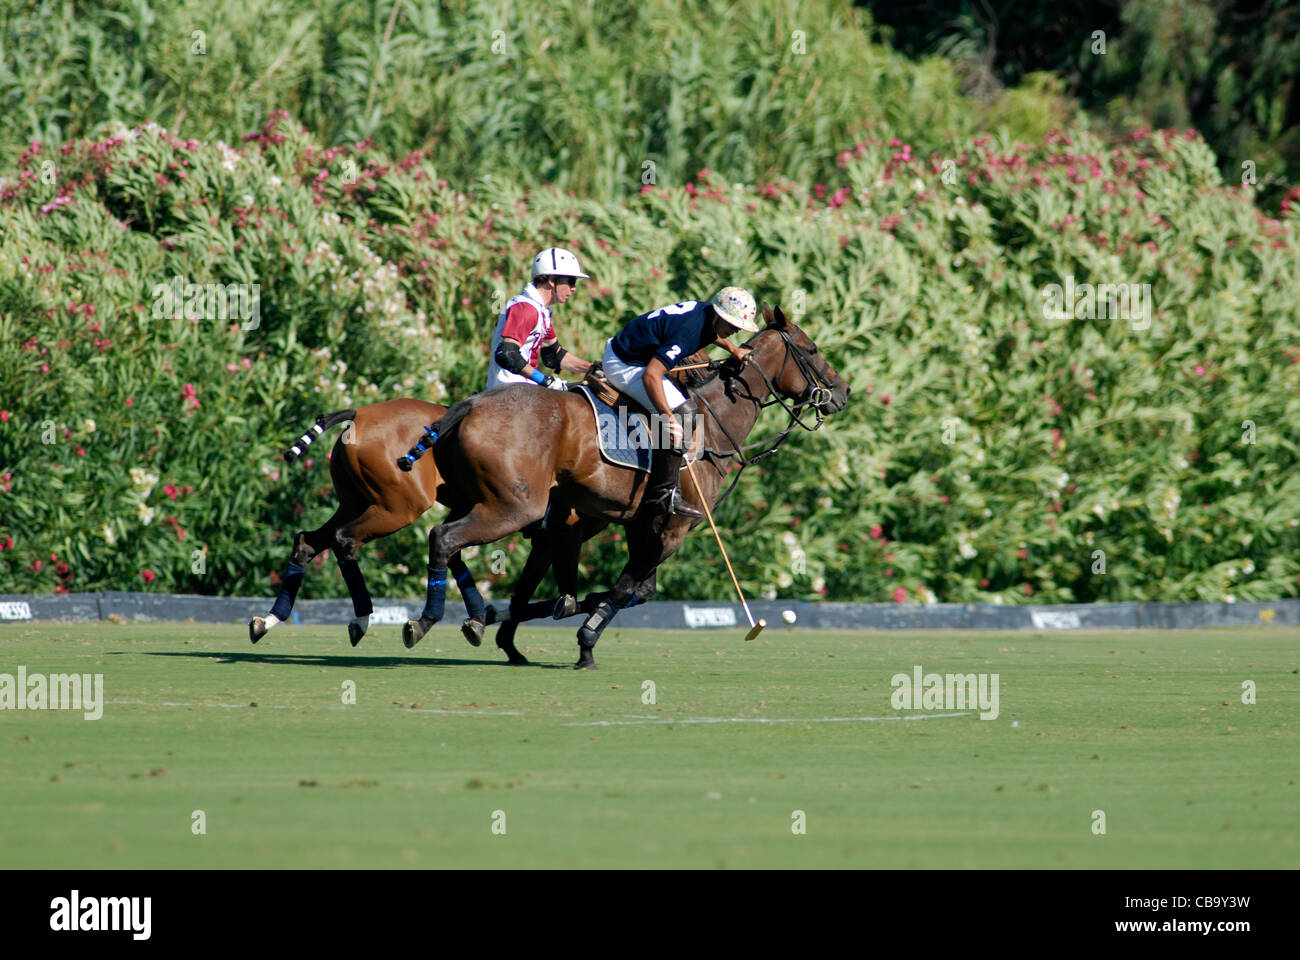 2 polo players in action with one striking the ball Stock Photo